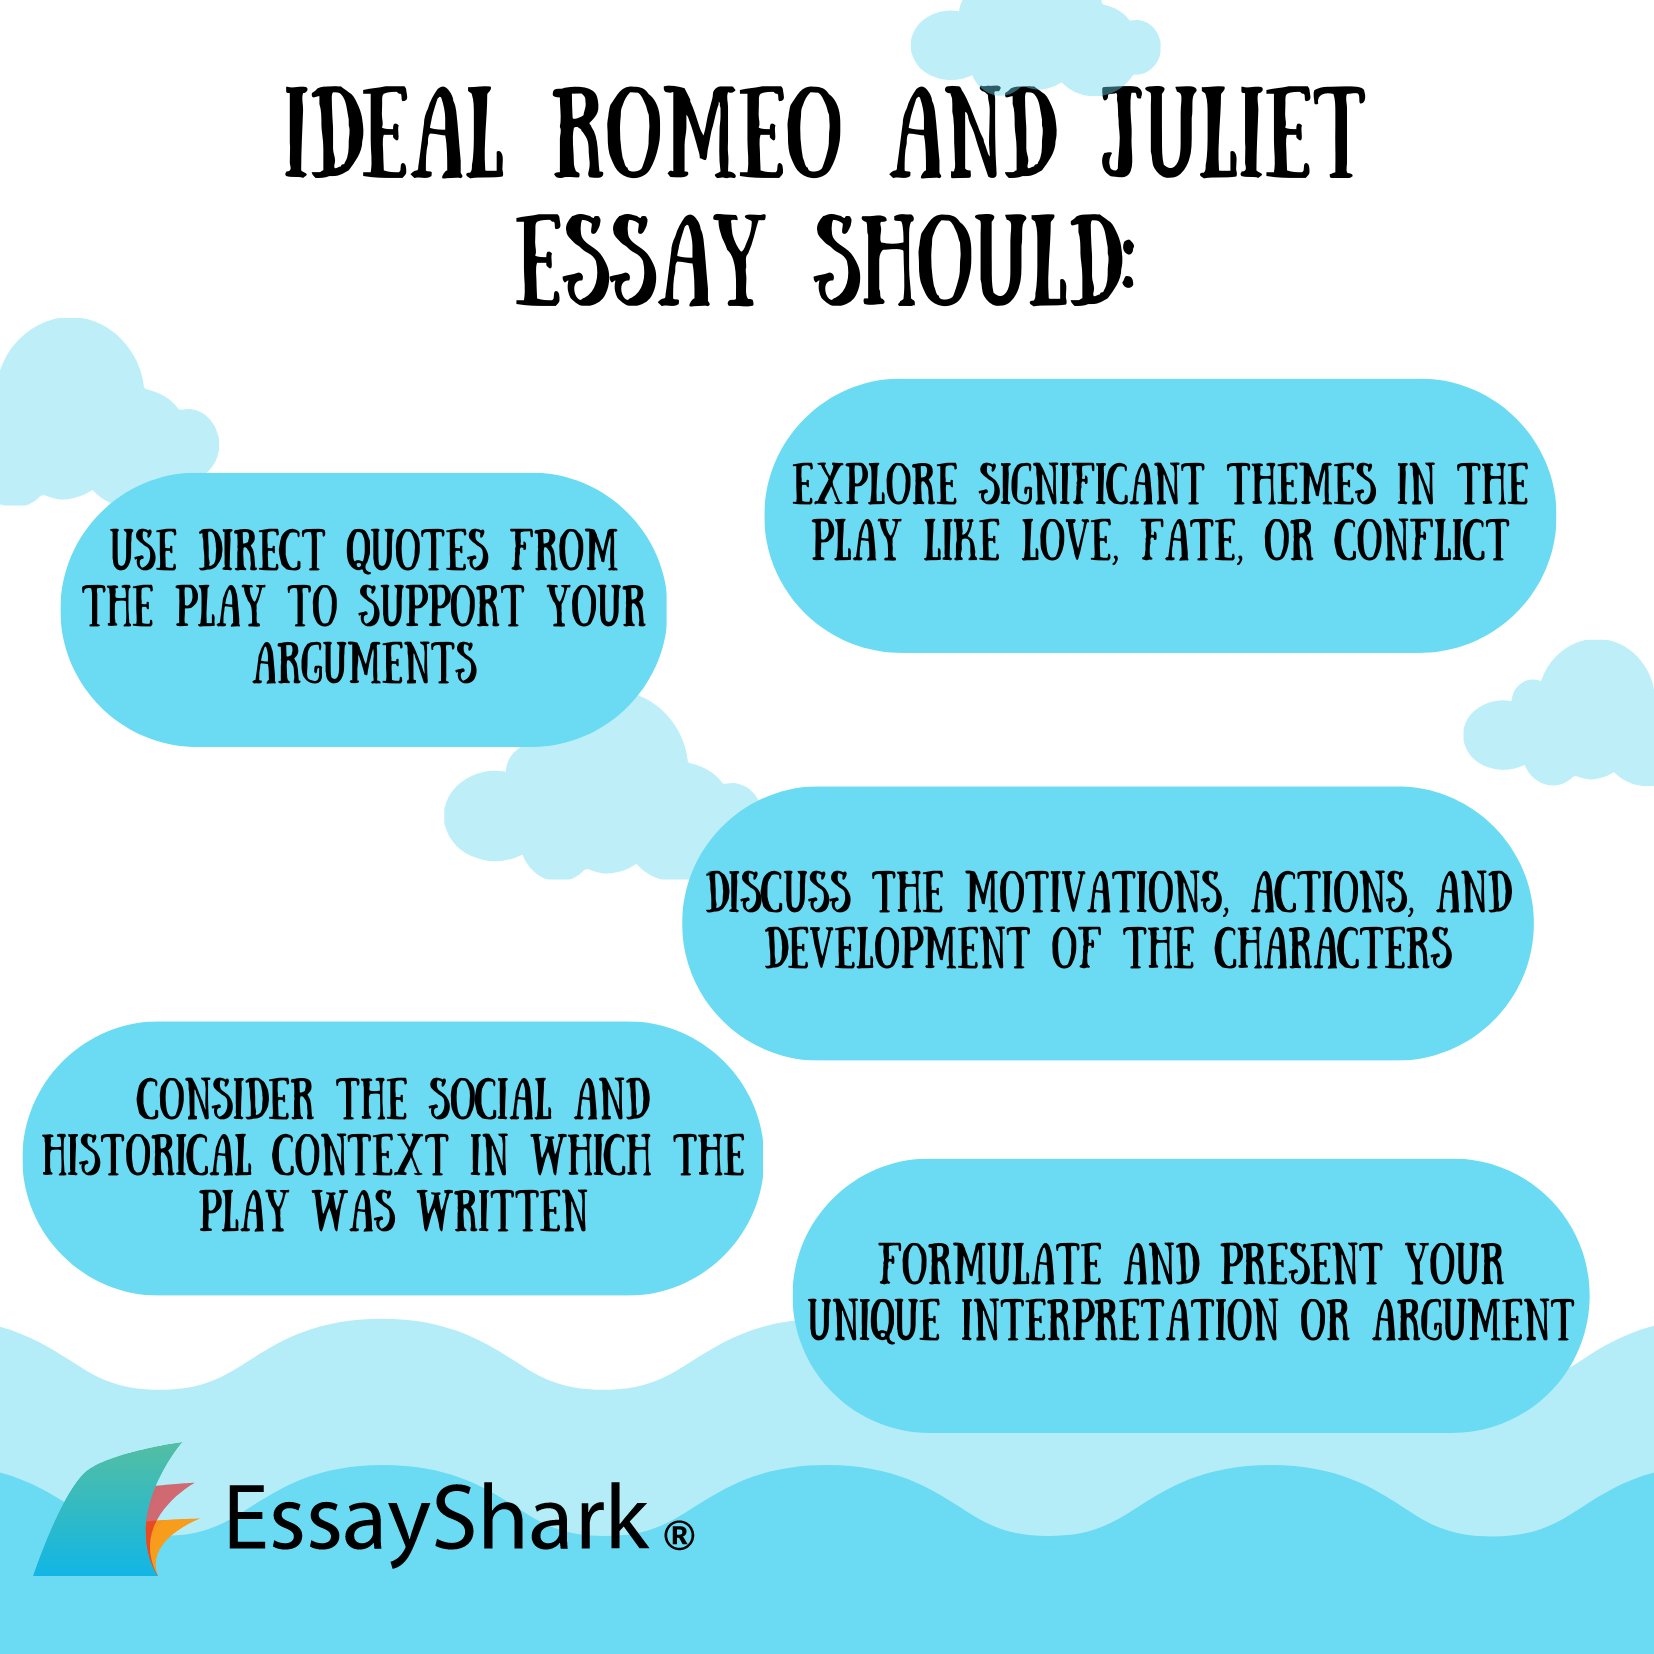 Romeo and Juliet Essay Writing Tips